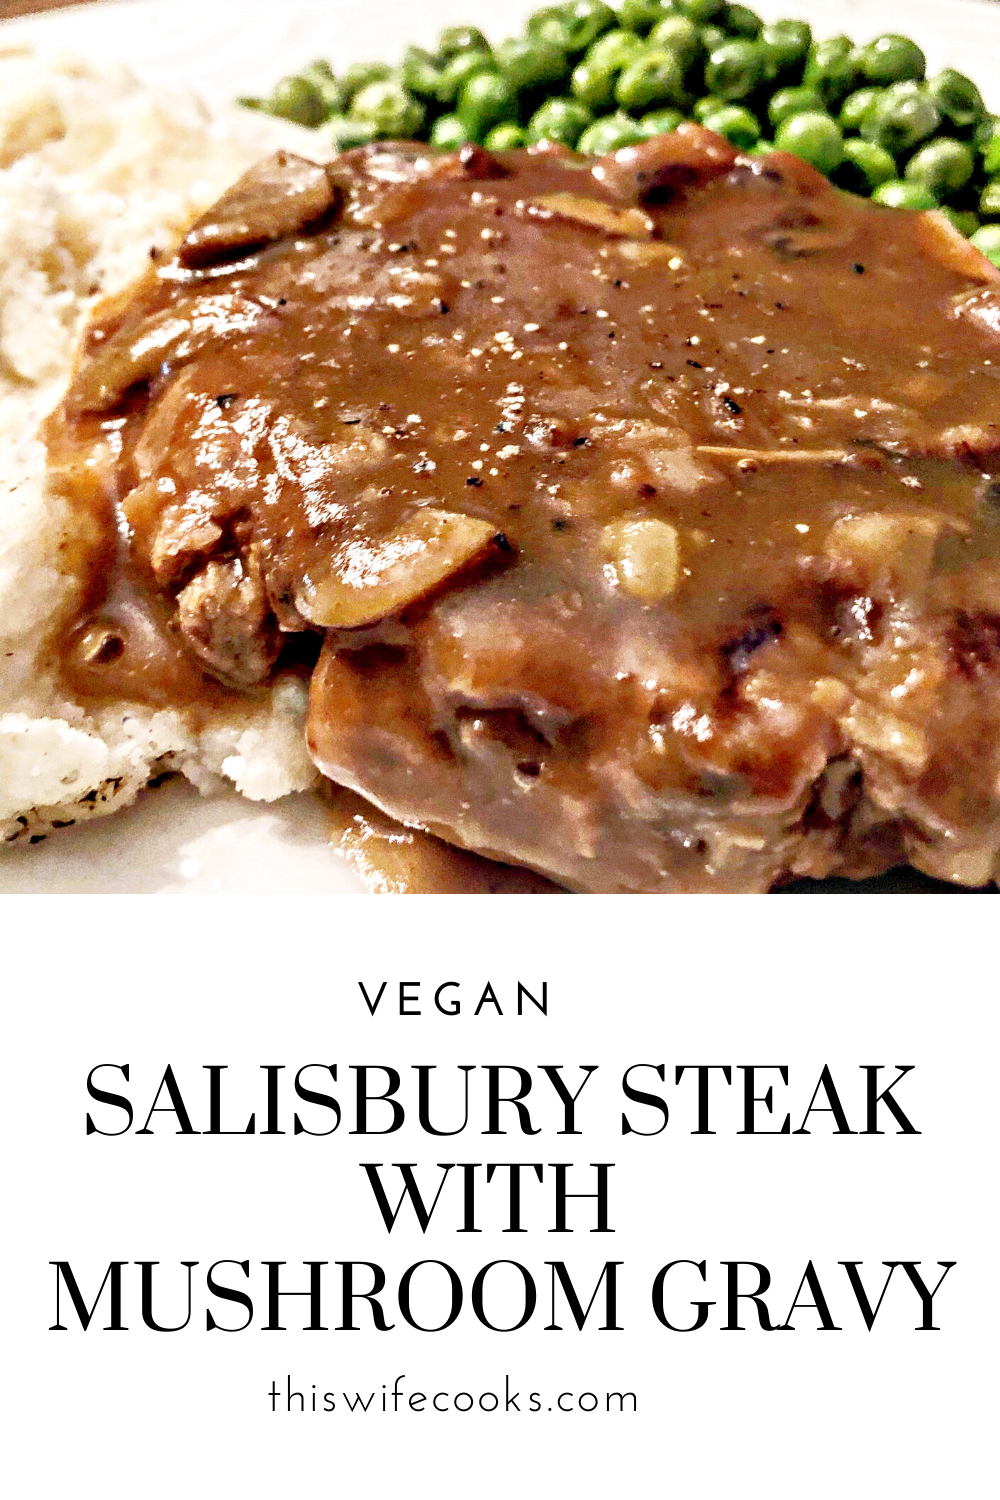 Vegan Salisbury Steak with Mushroom Gravy - Simple and satisfying, old school stick to your ribs comfort food. This one is sure to become a family favorite! via @thiswifecooks